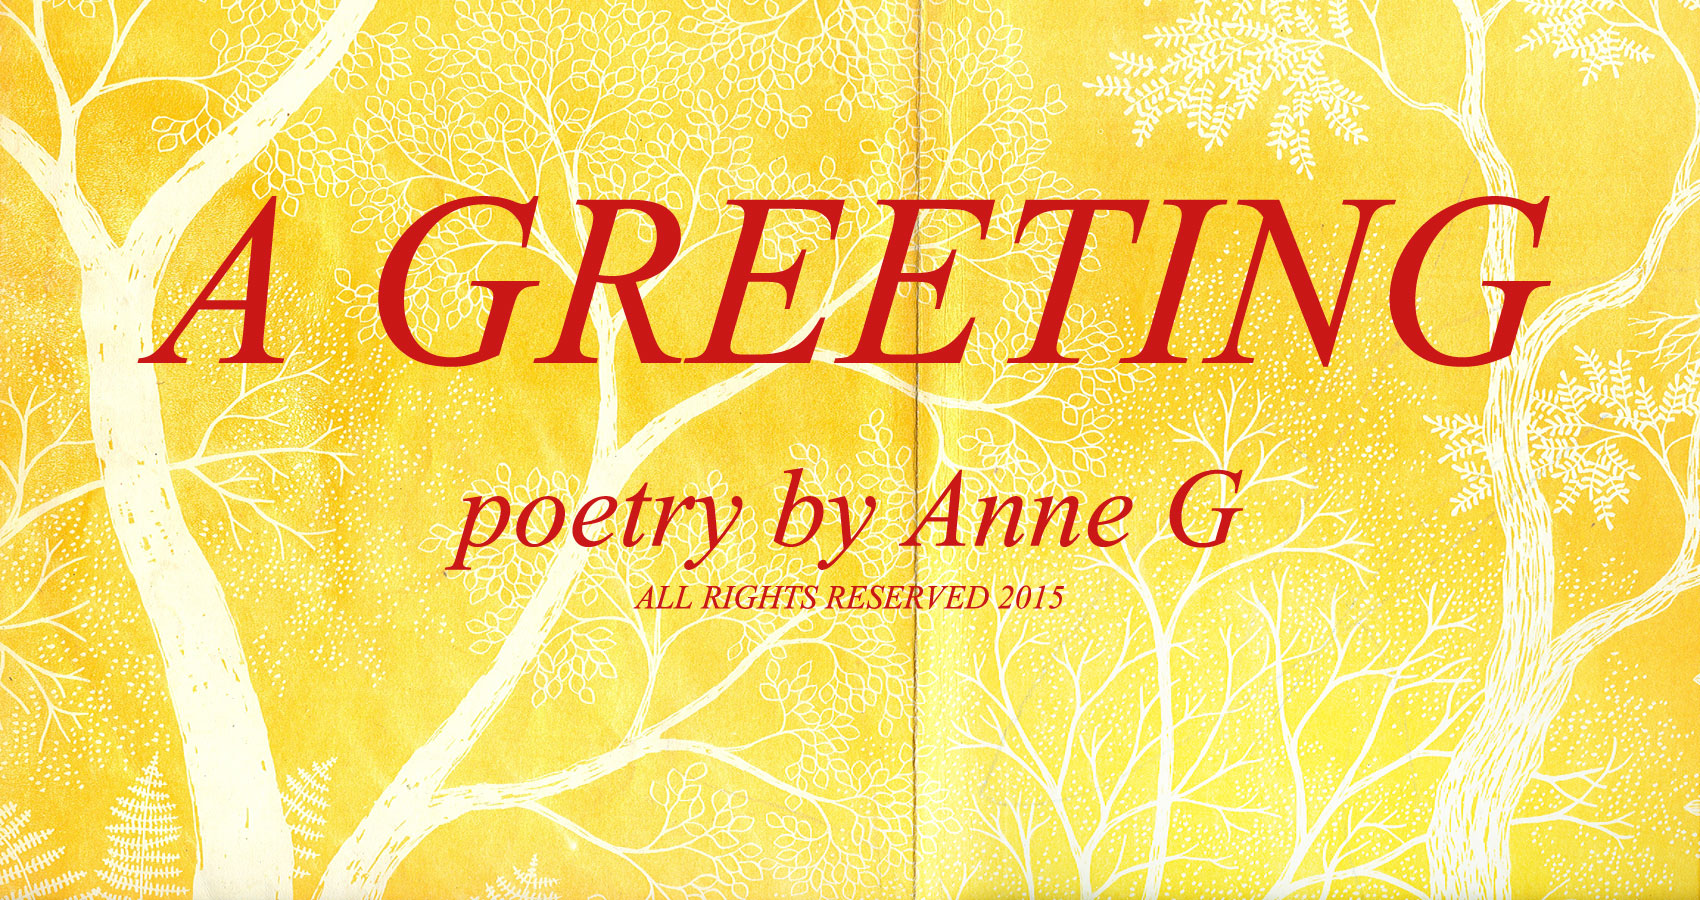 A Greeting at spillwords.com by Anne G